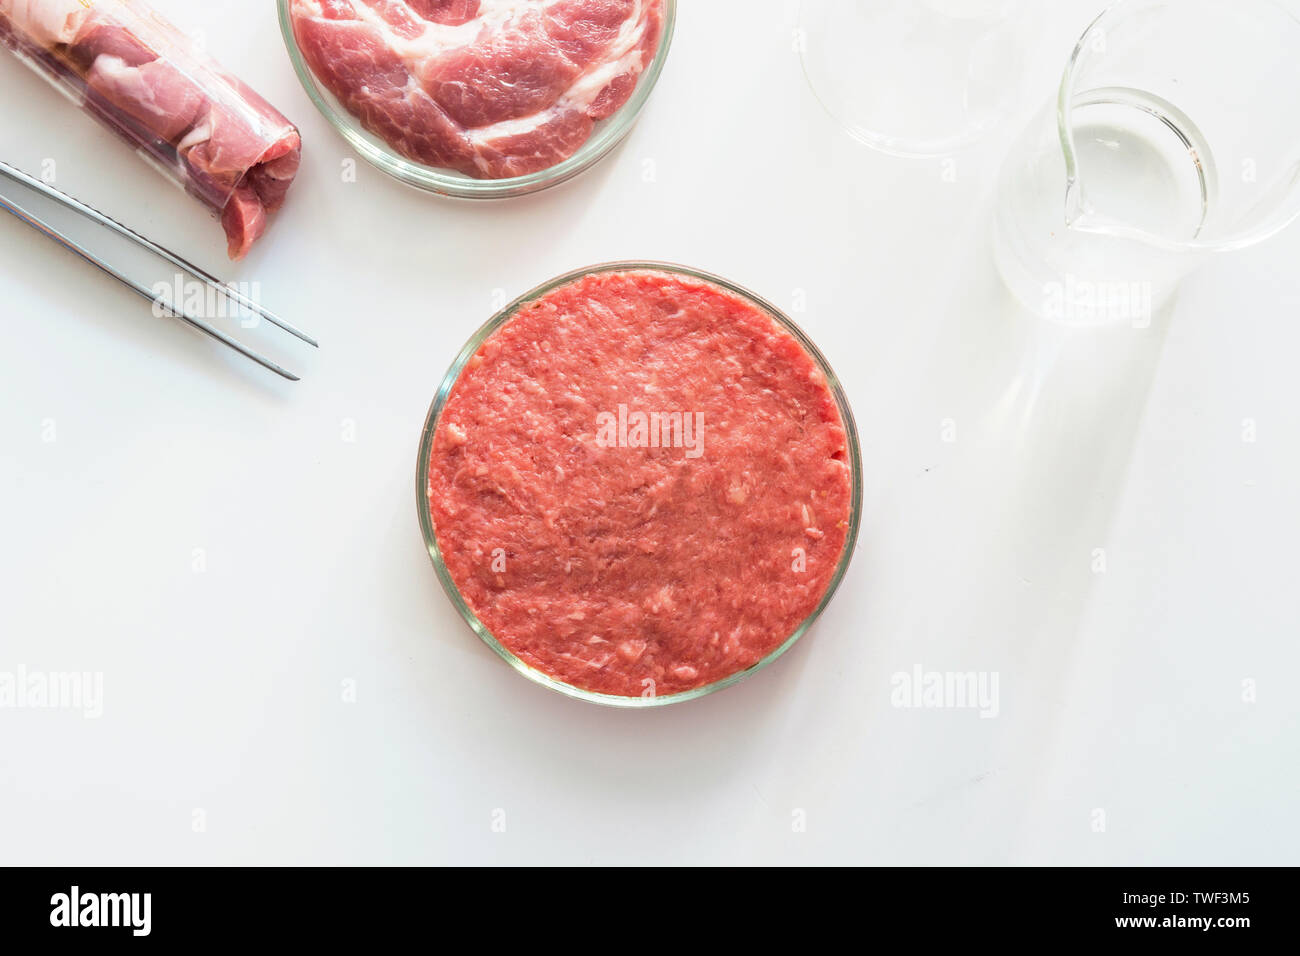 Laboratory studies of meat. Minced meat in glass Petri dish. View ...